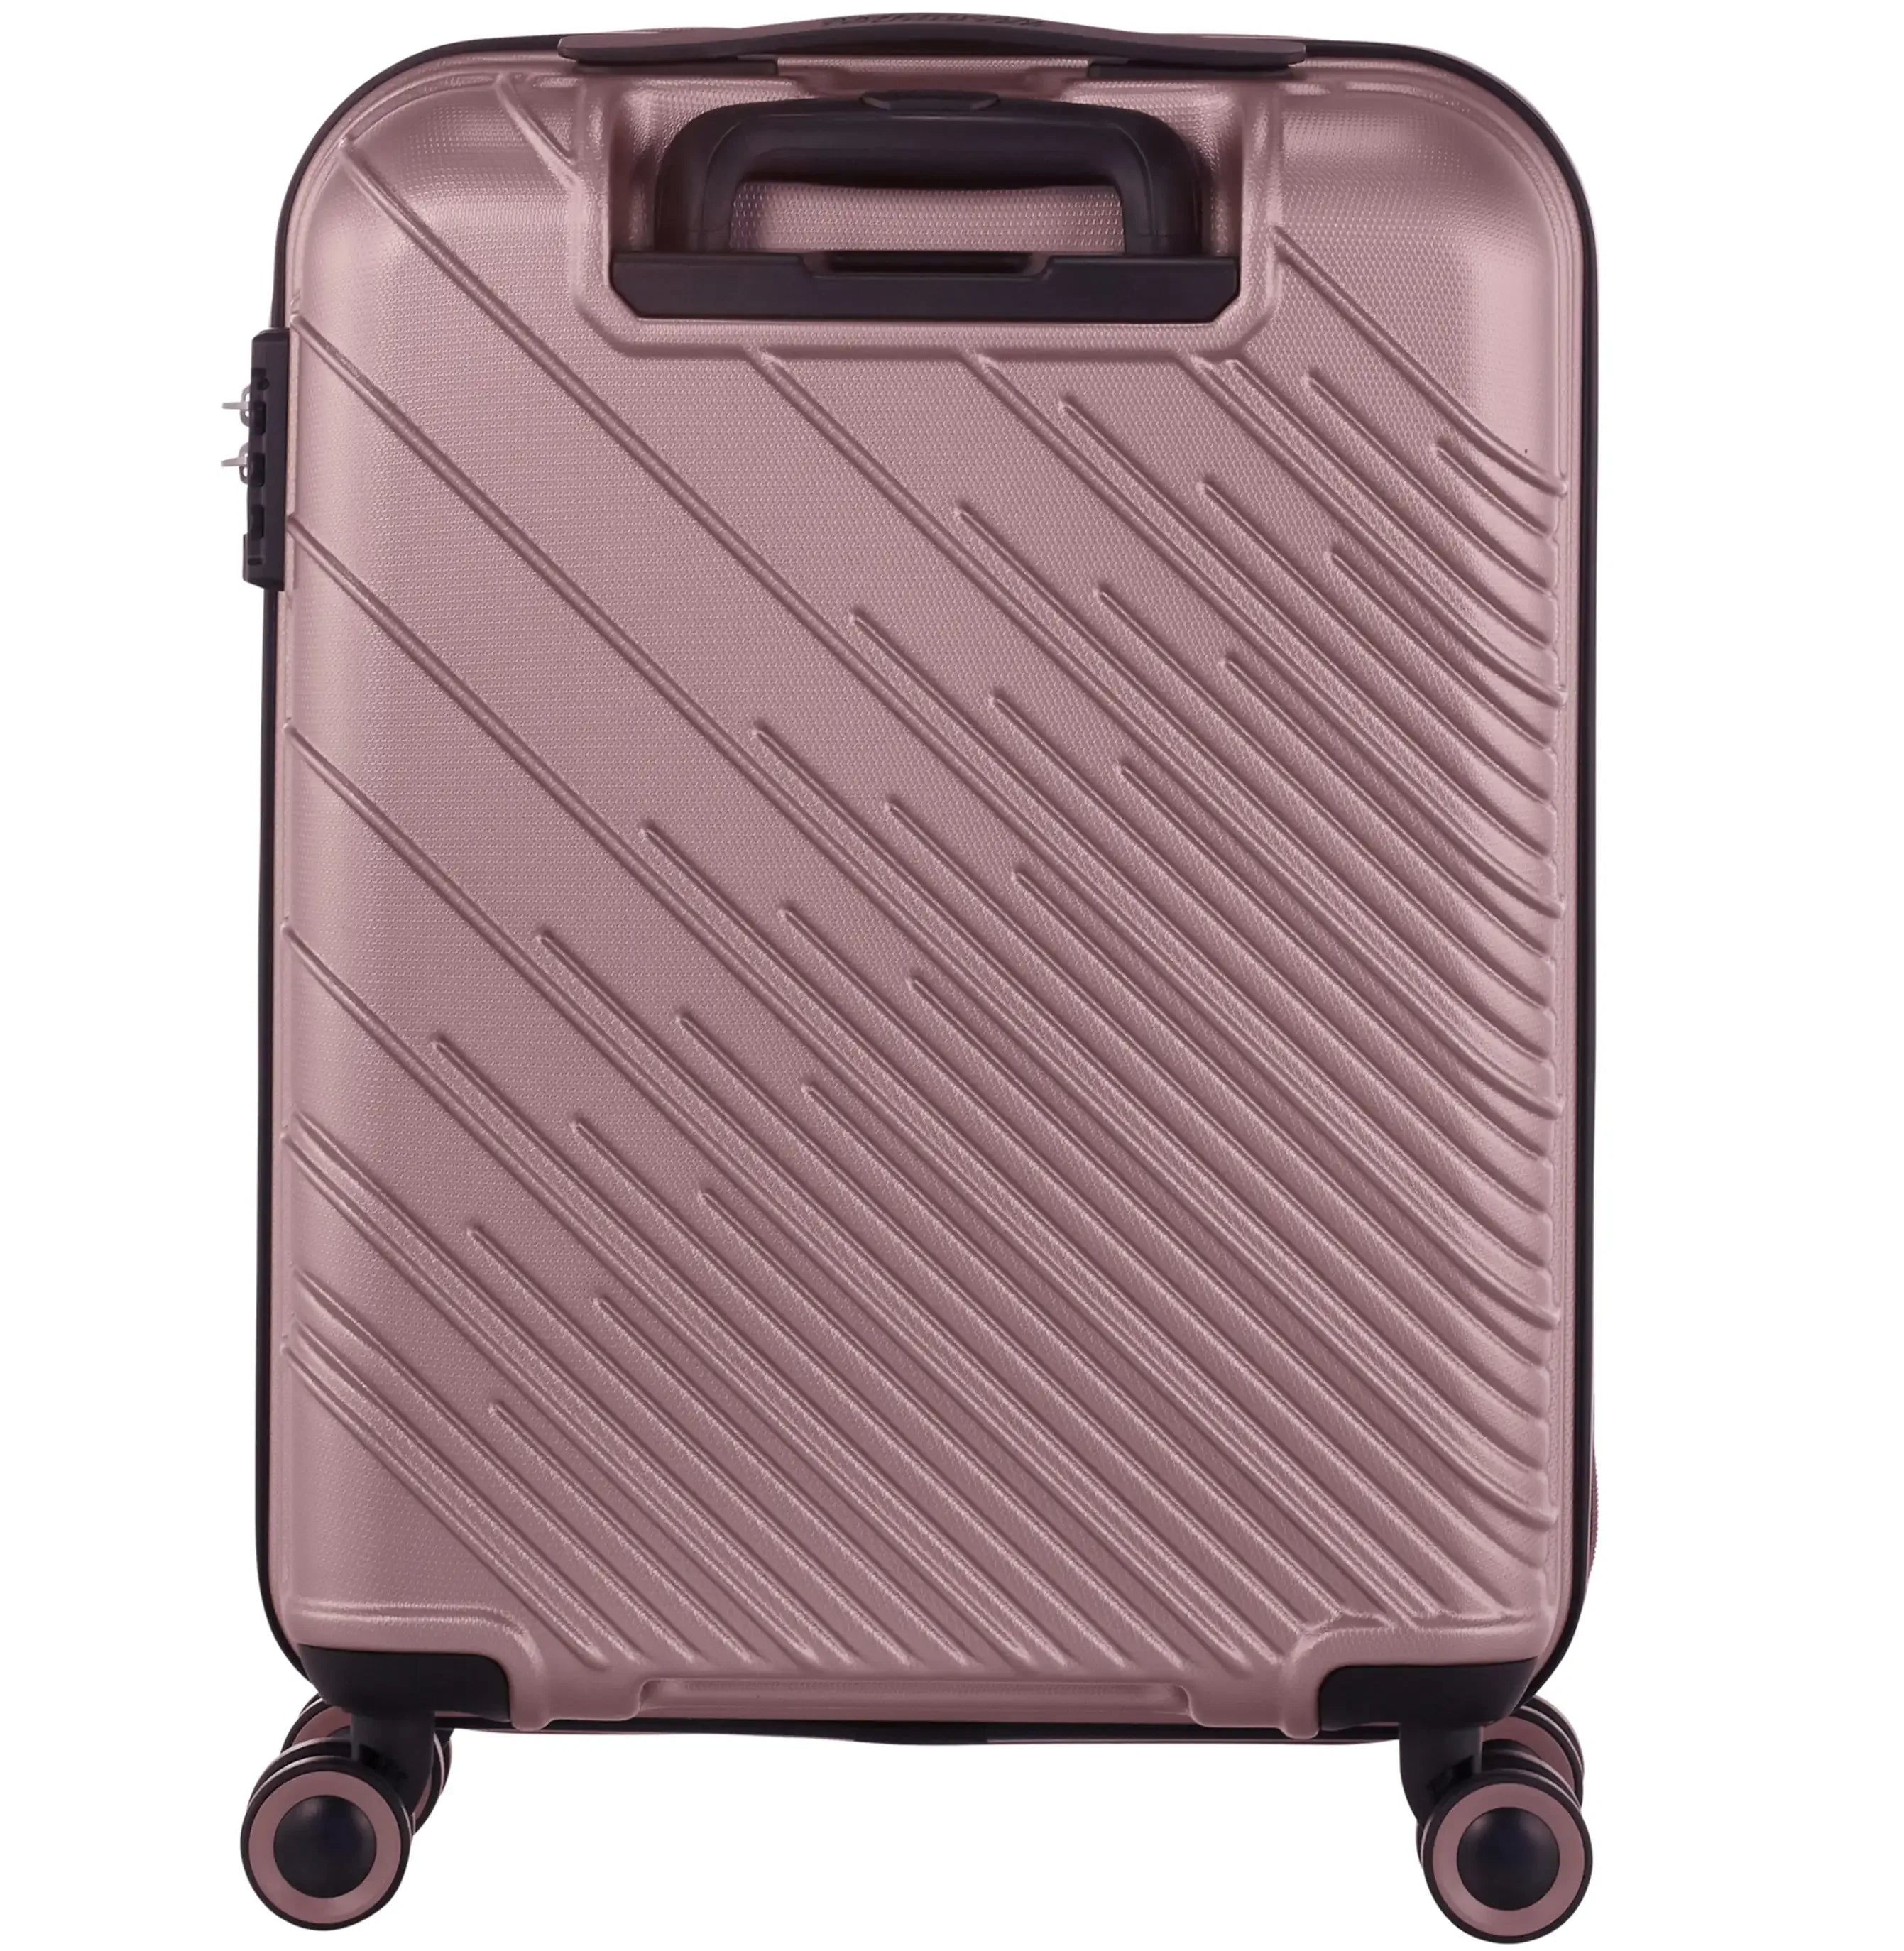 American Tourister Speedstar Spinner trolley cabine 4 roues 55 cm - or rose